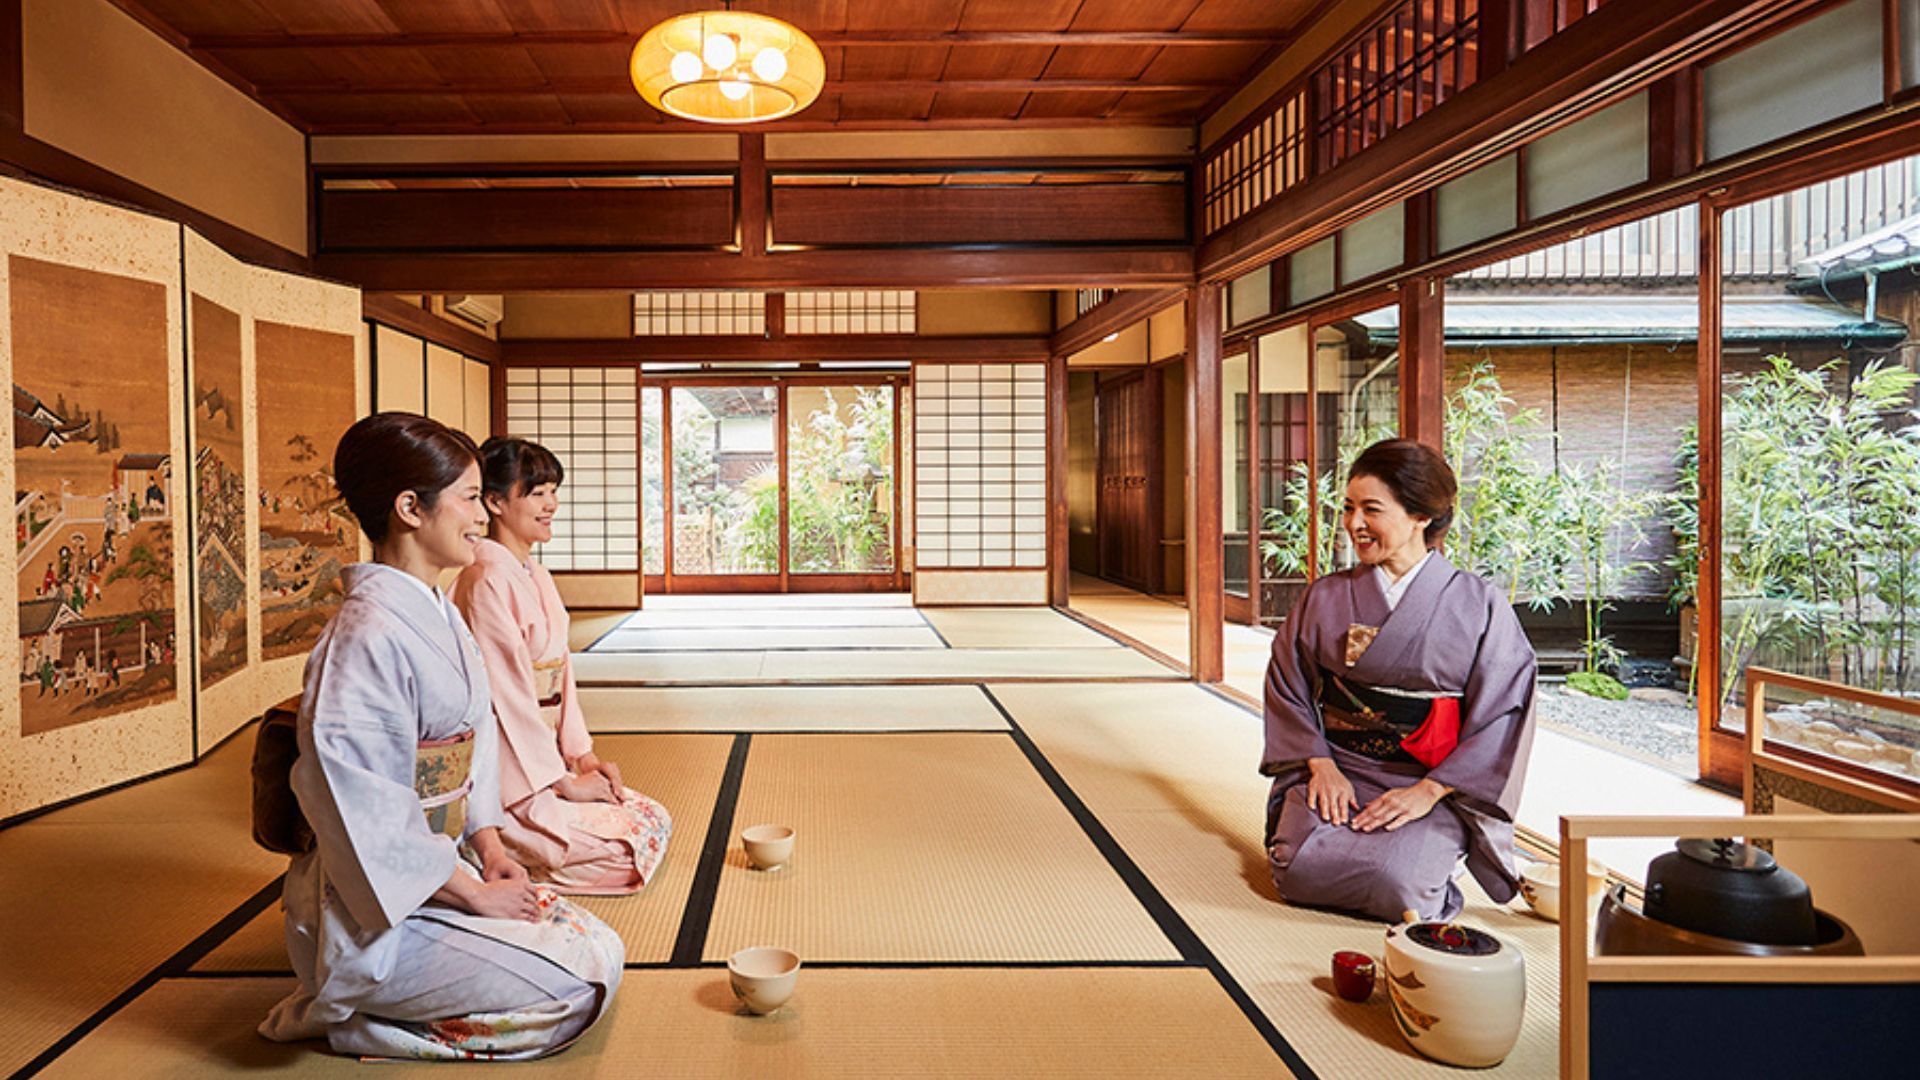 Traditional Tea Ceremony at Maikoya Kyoto travel guide